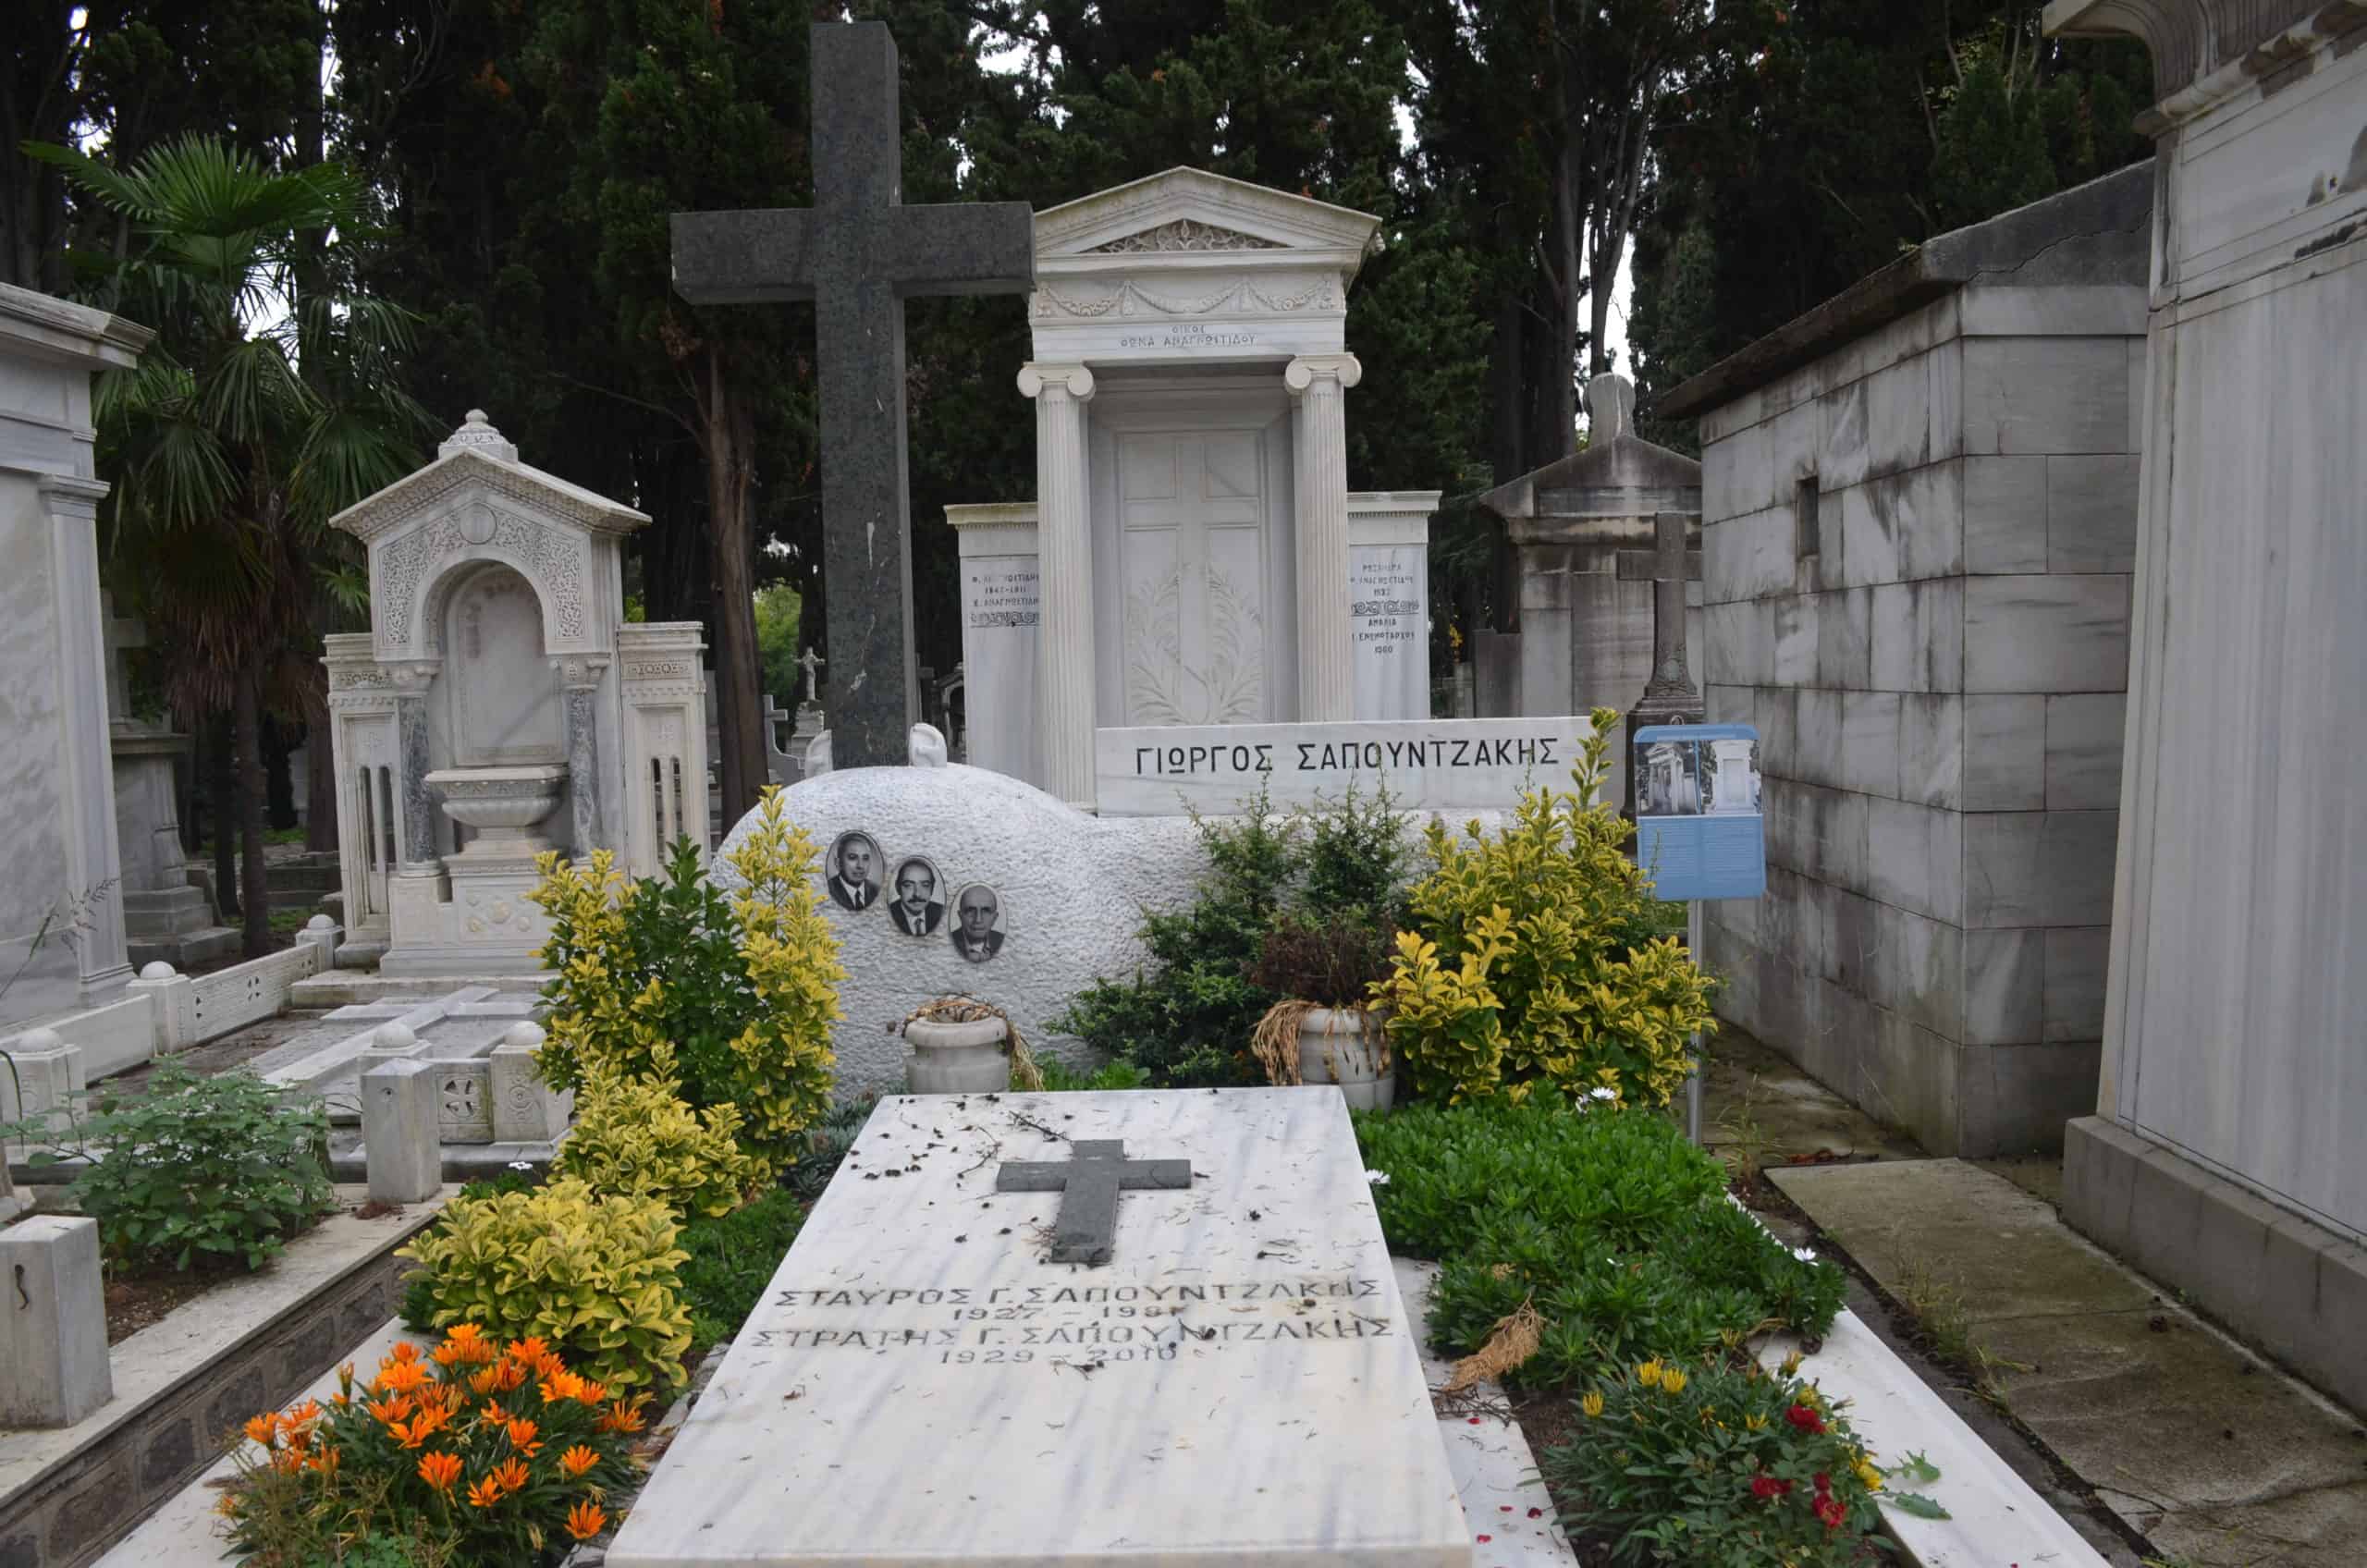 Tomb at the Greek Orthodox Cemetery